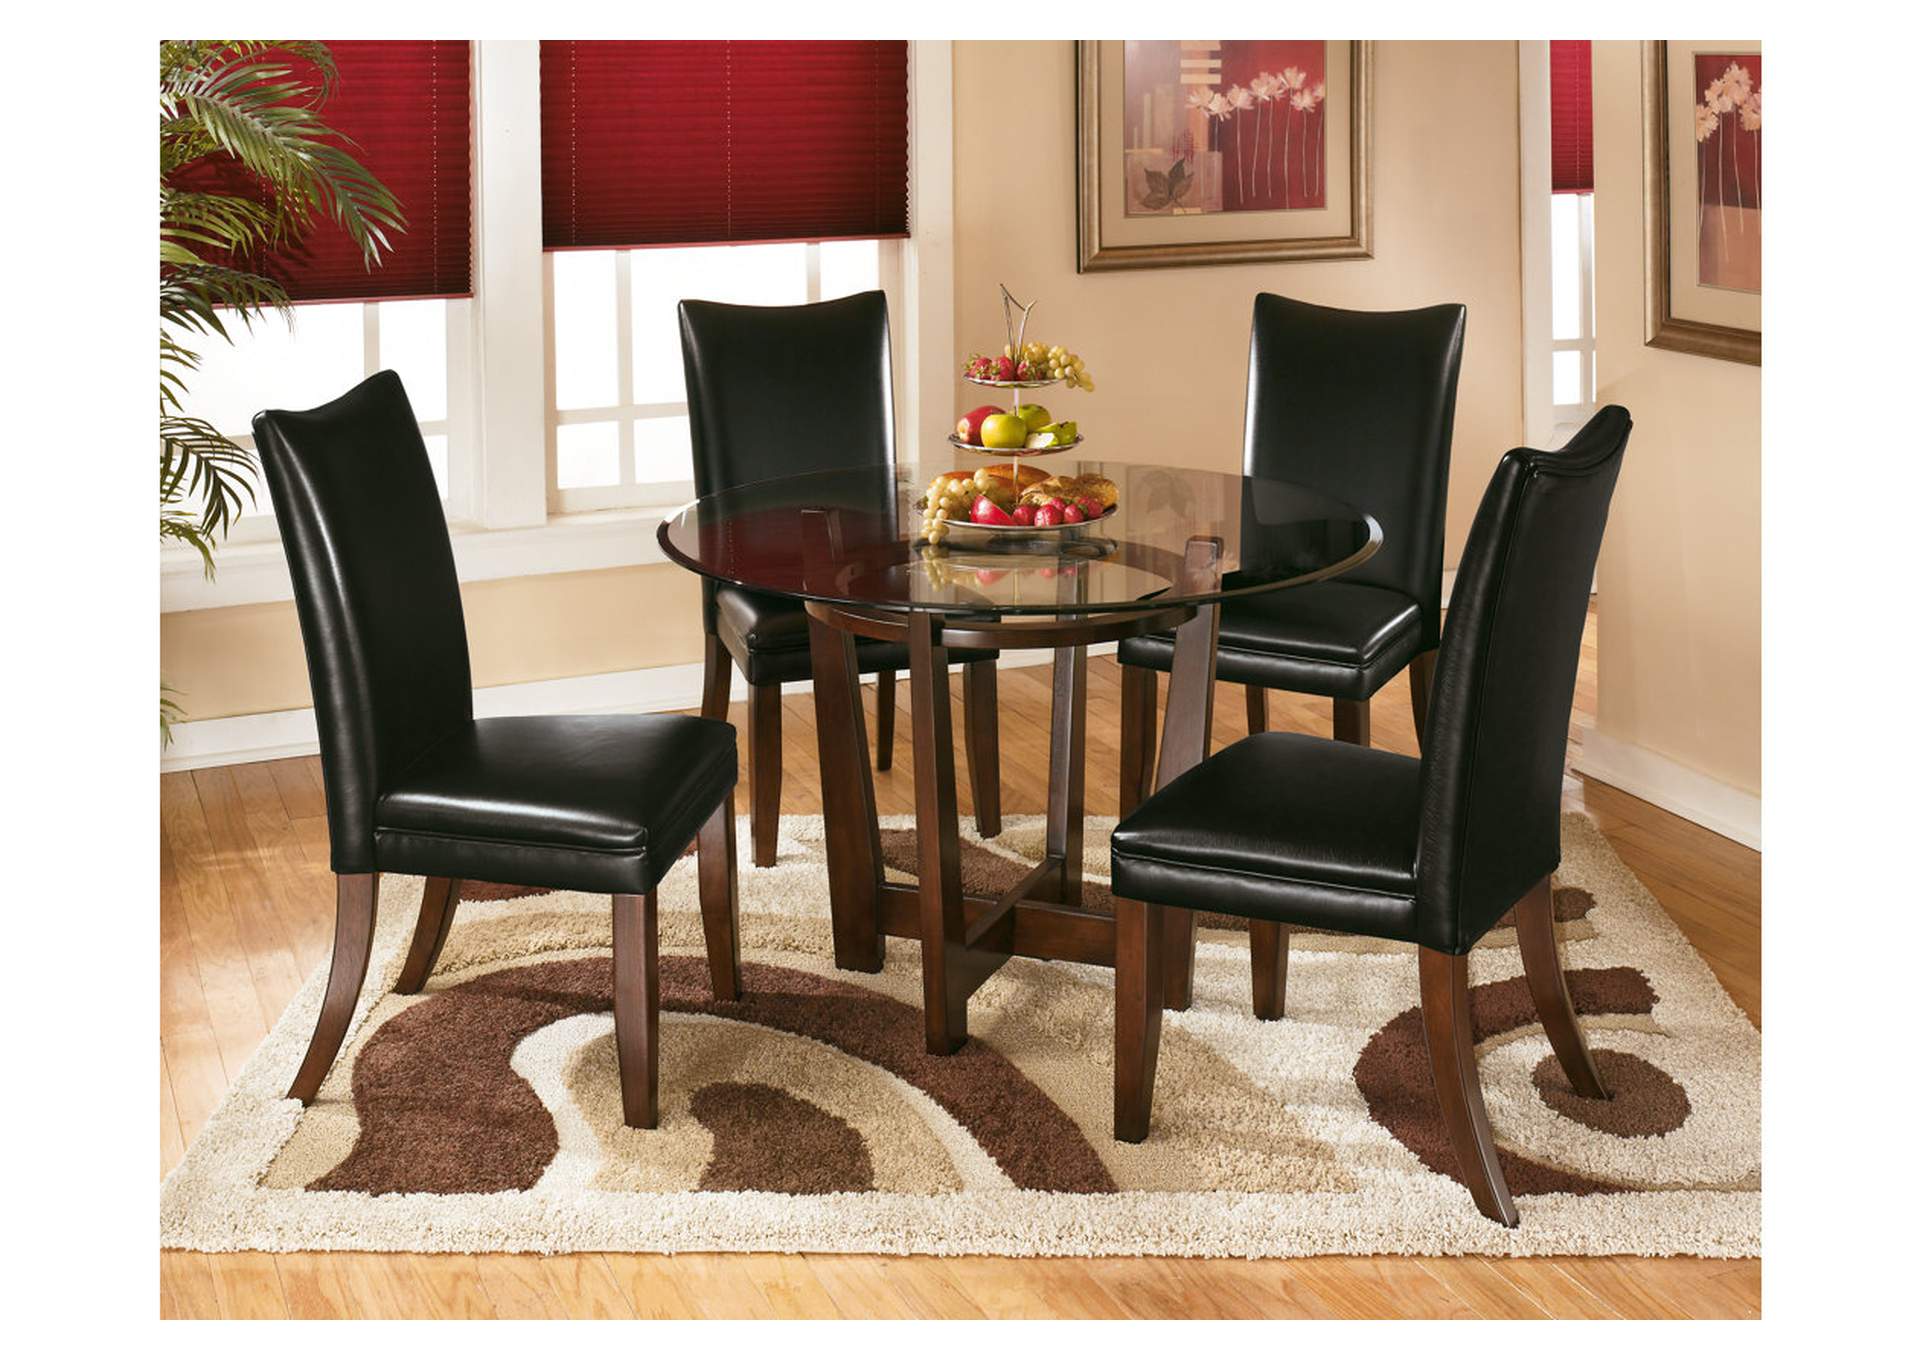 Charell Round Dining Table w/ 4 Black Side Chairs,Signature Design by Ashley